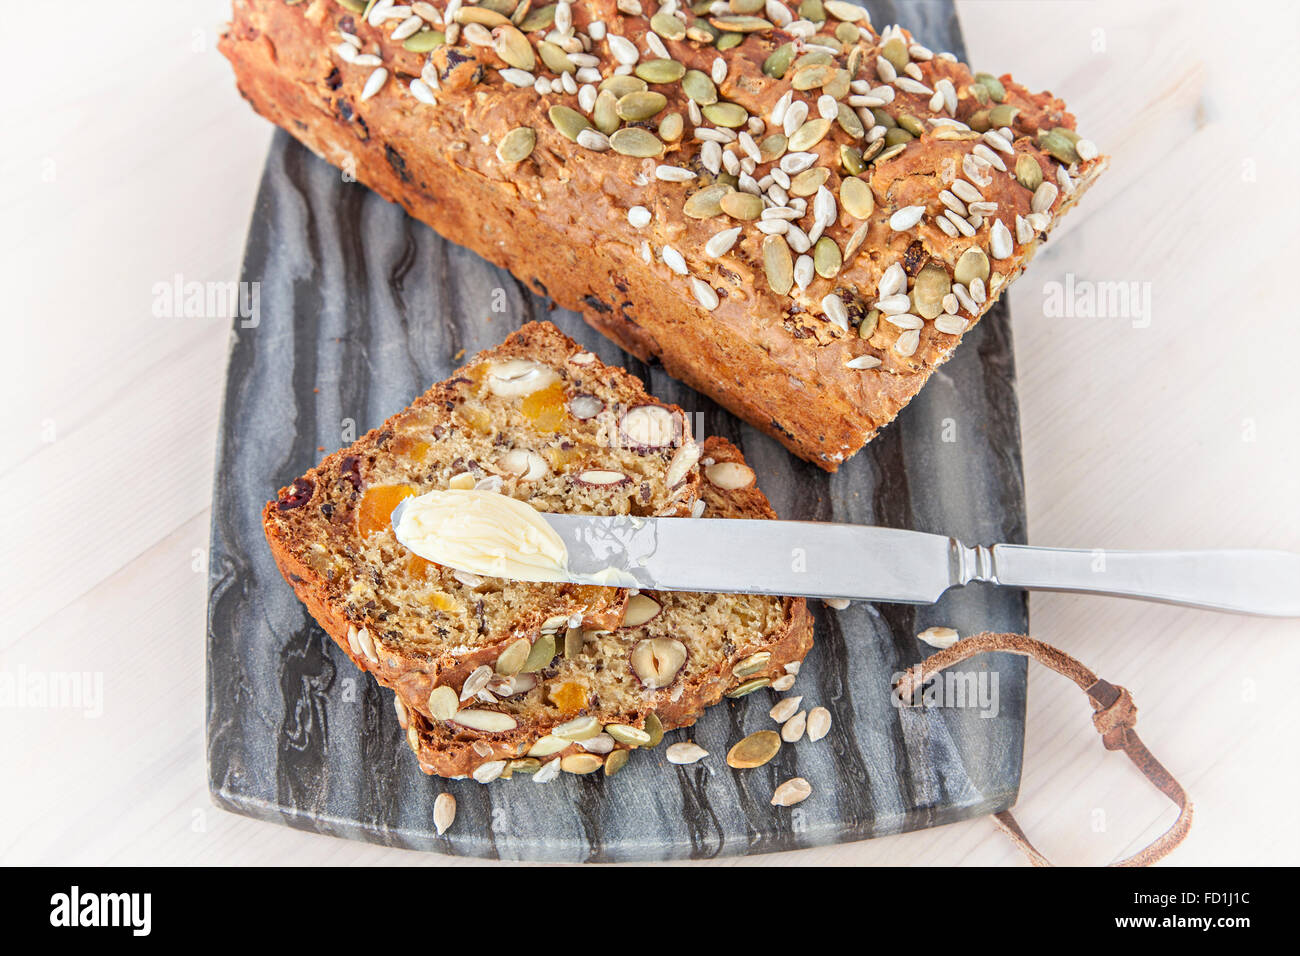 Image of delicious homemade spelt bread on a marble board. Stock Photo